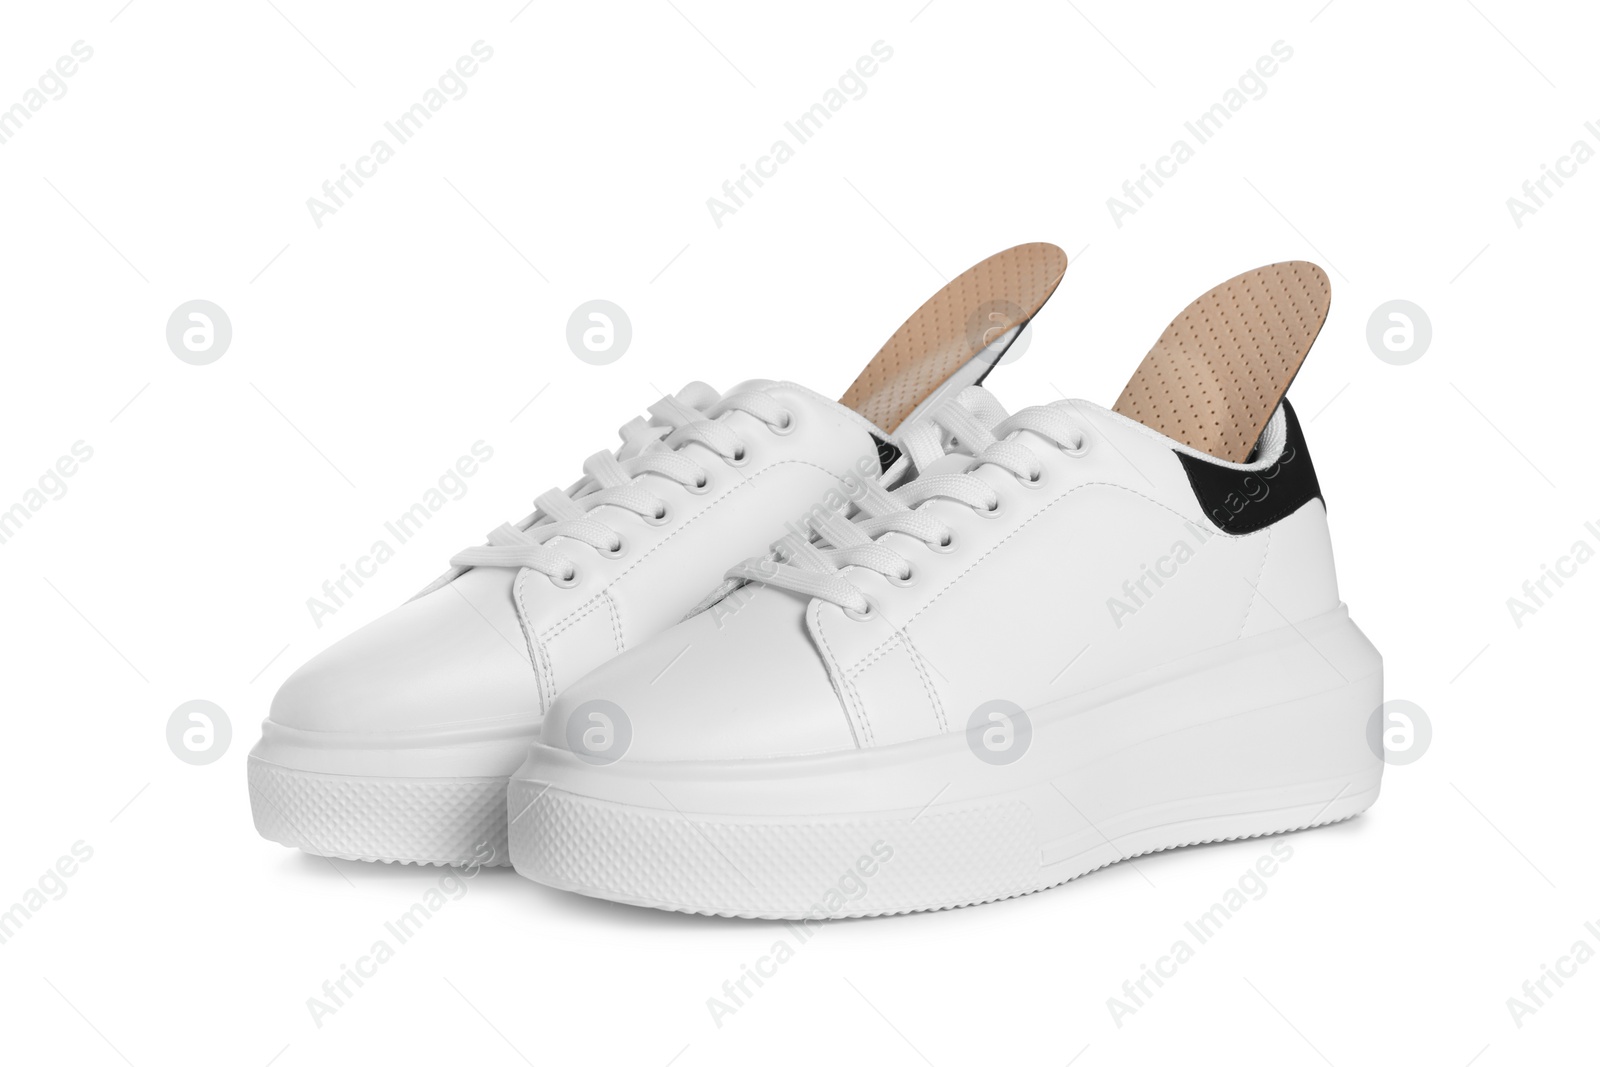 Photo of Orthopedic insoles in shoes on white background